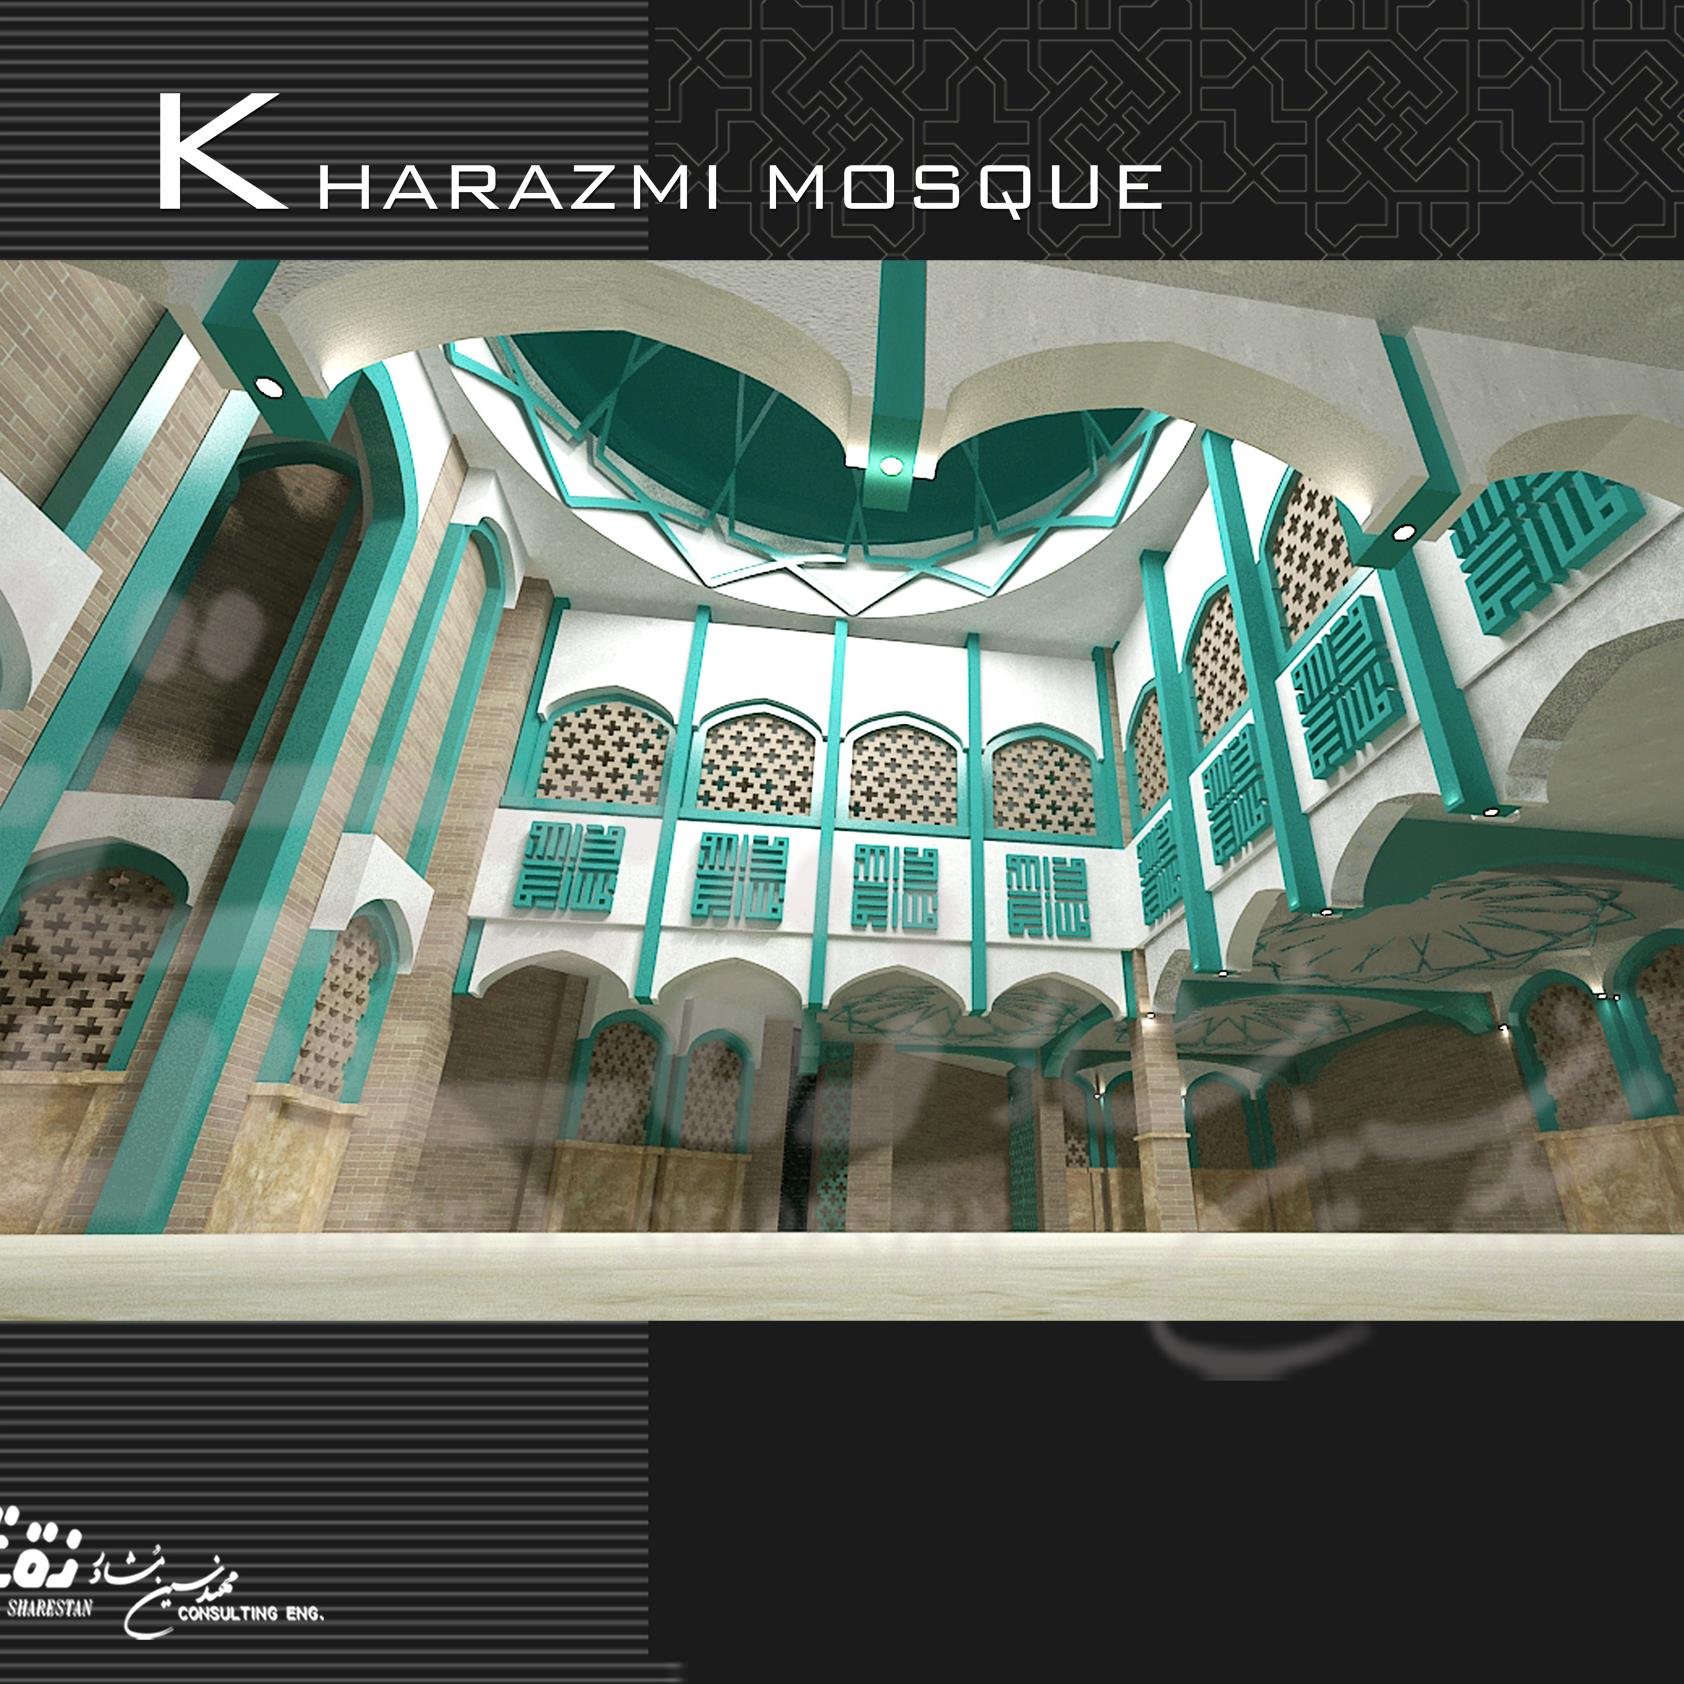 Design of the first and second stages of Kharazmi Mosque